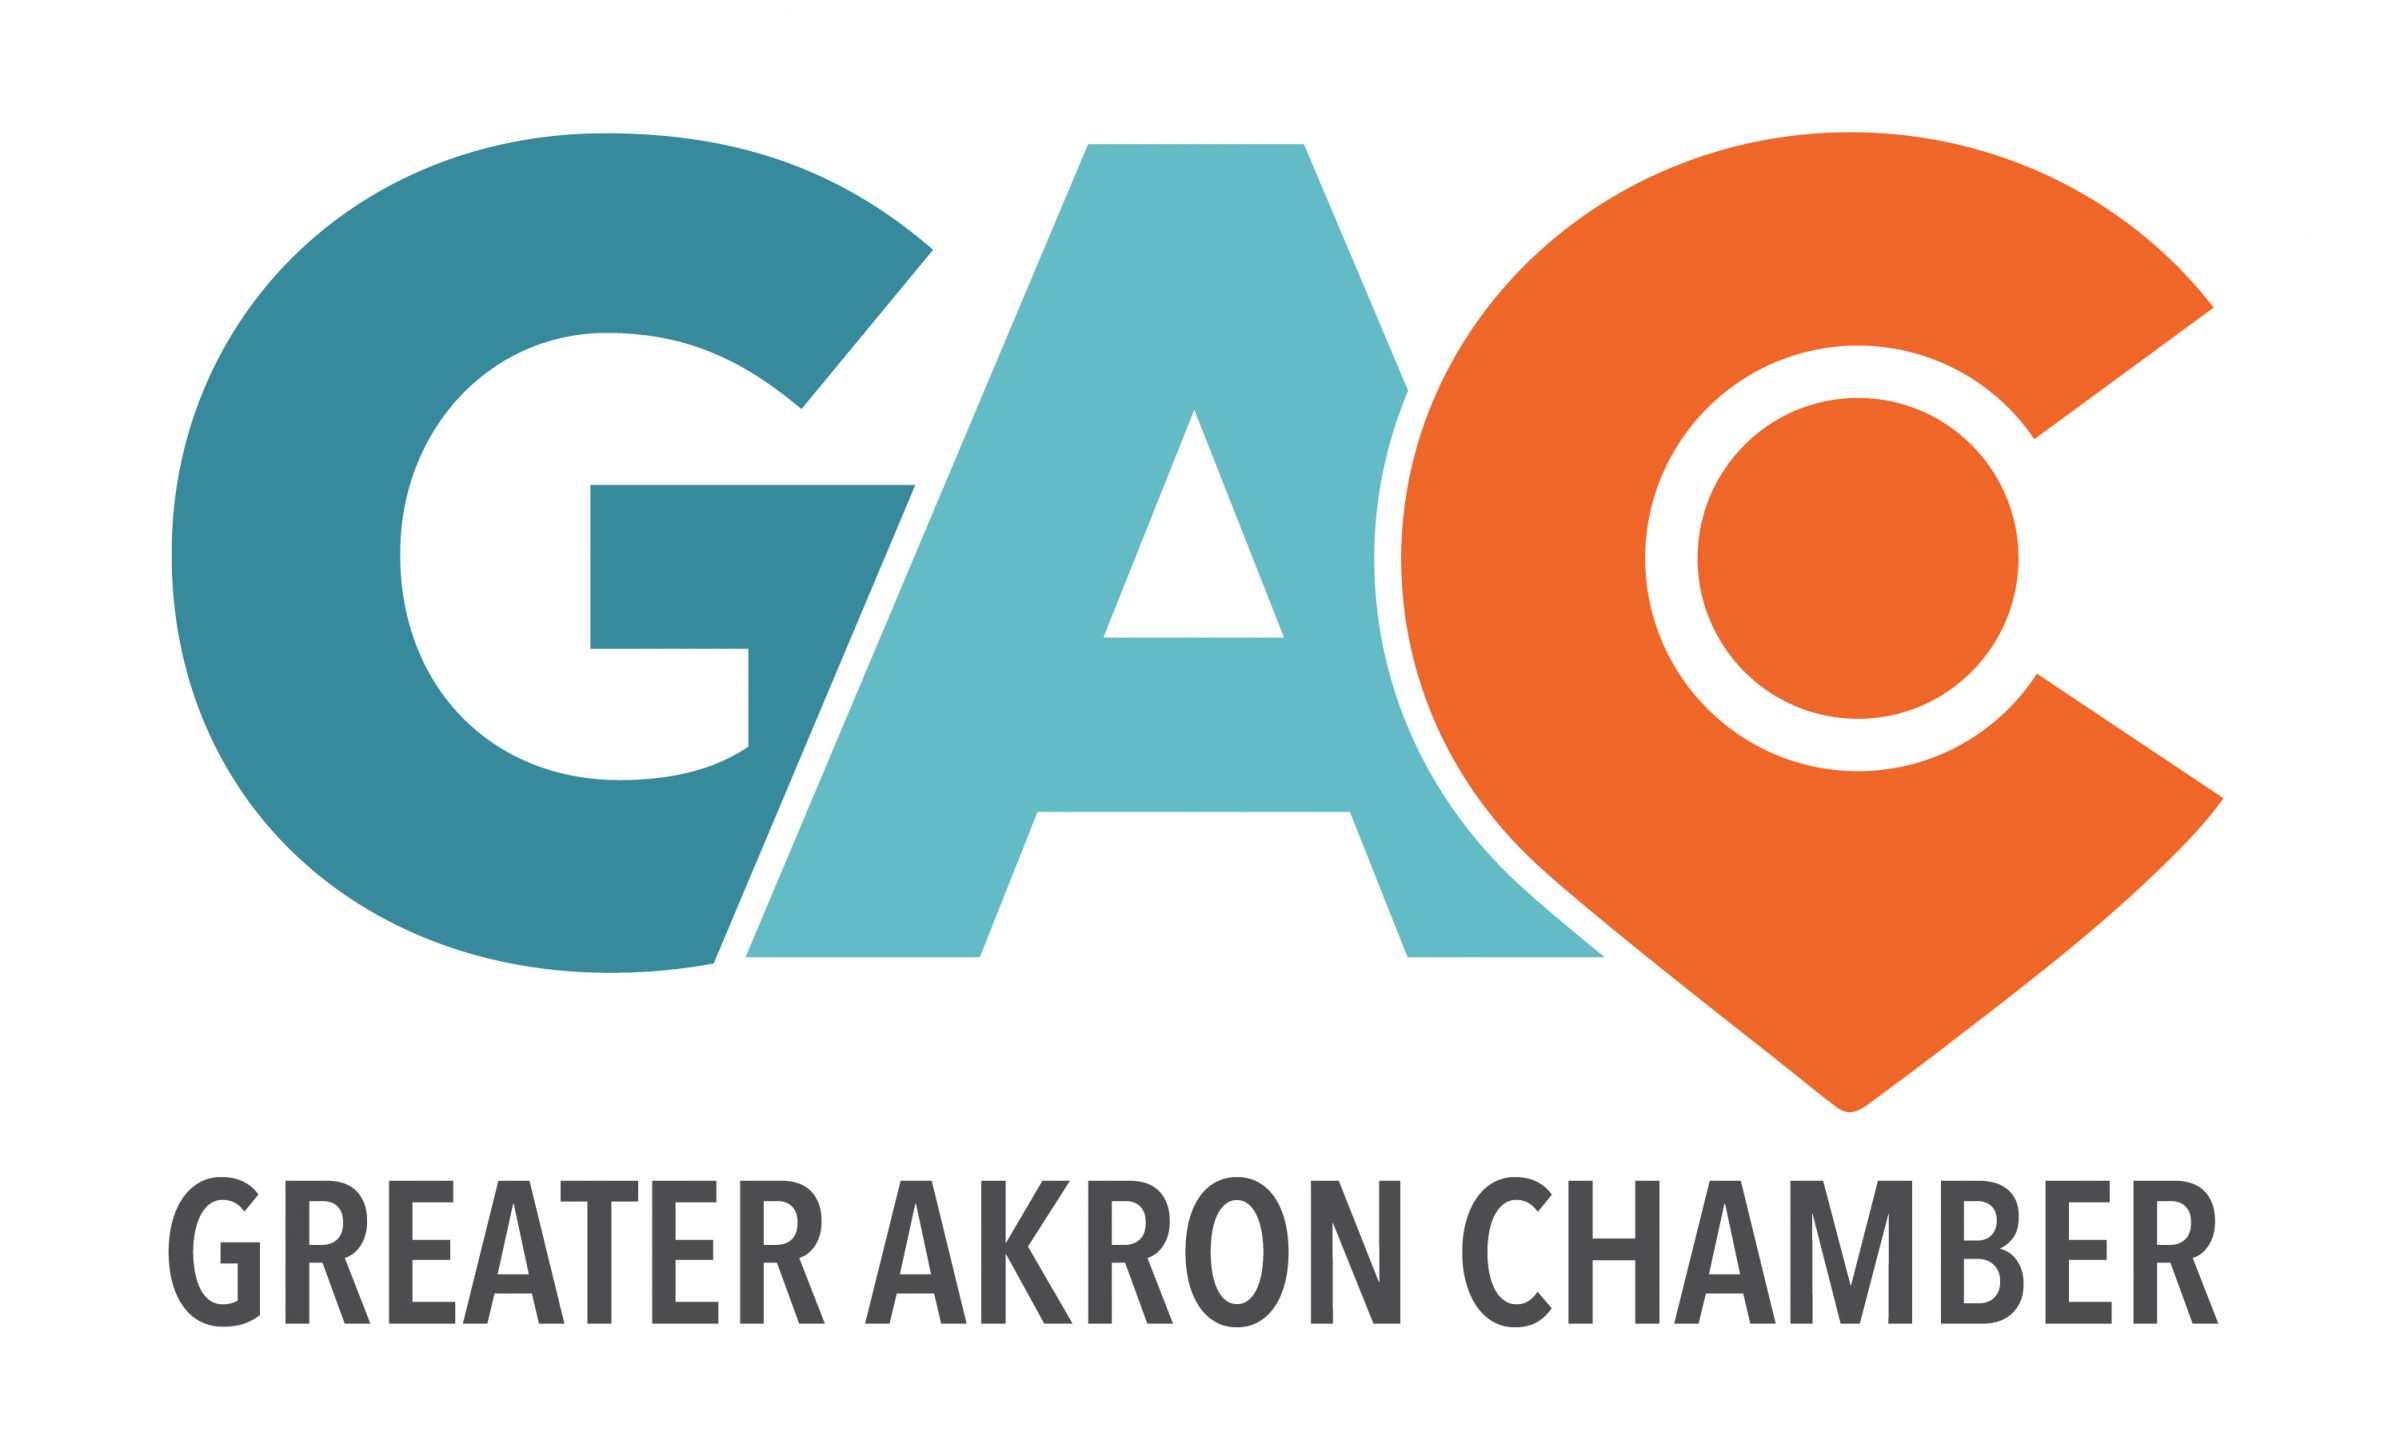 The Greater Akron Chamber